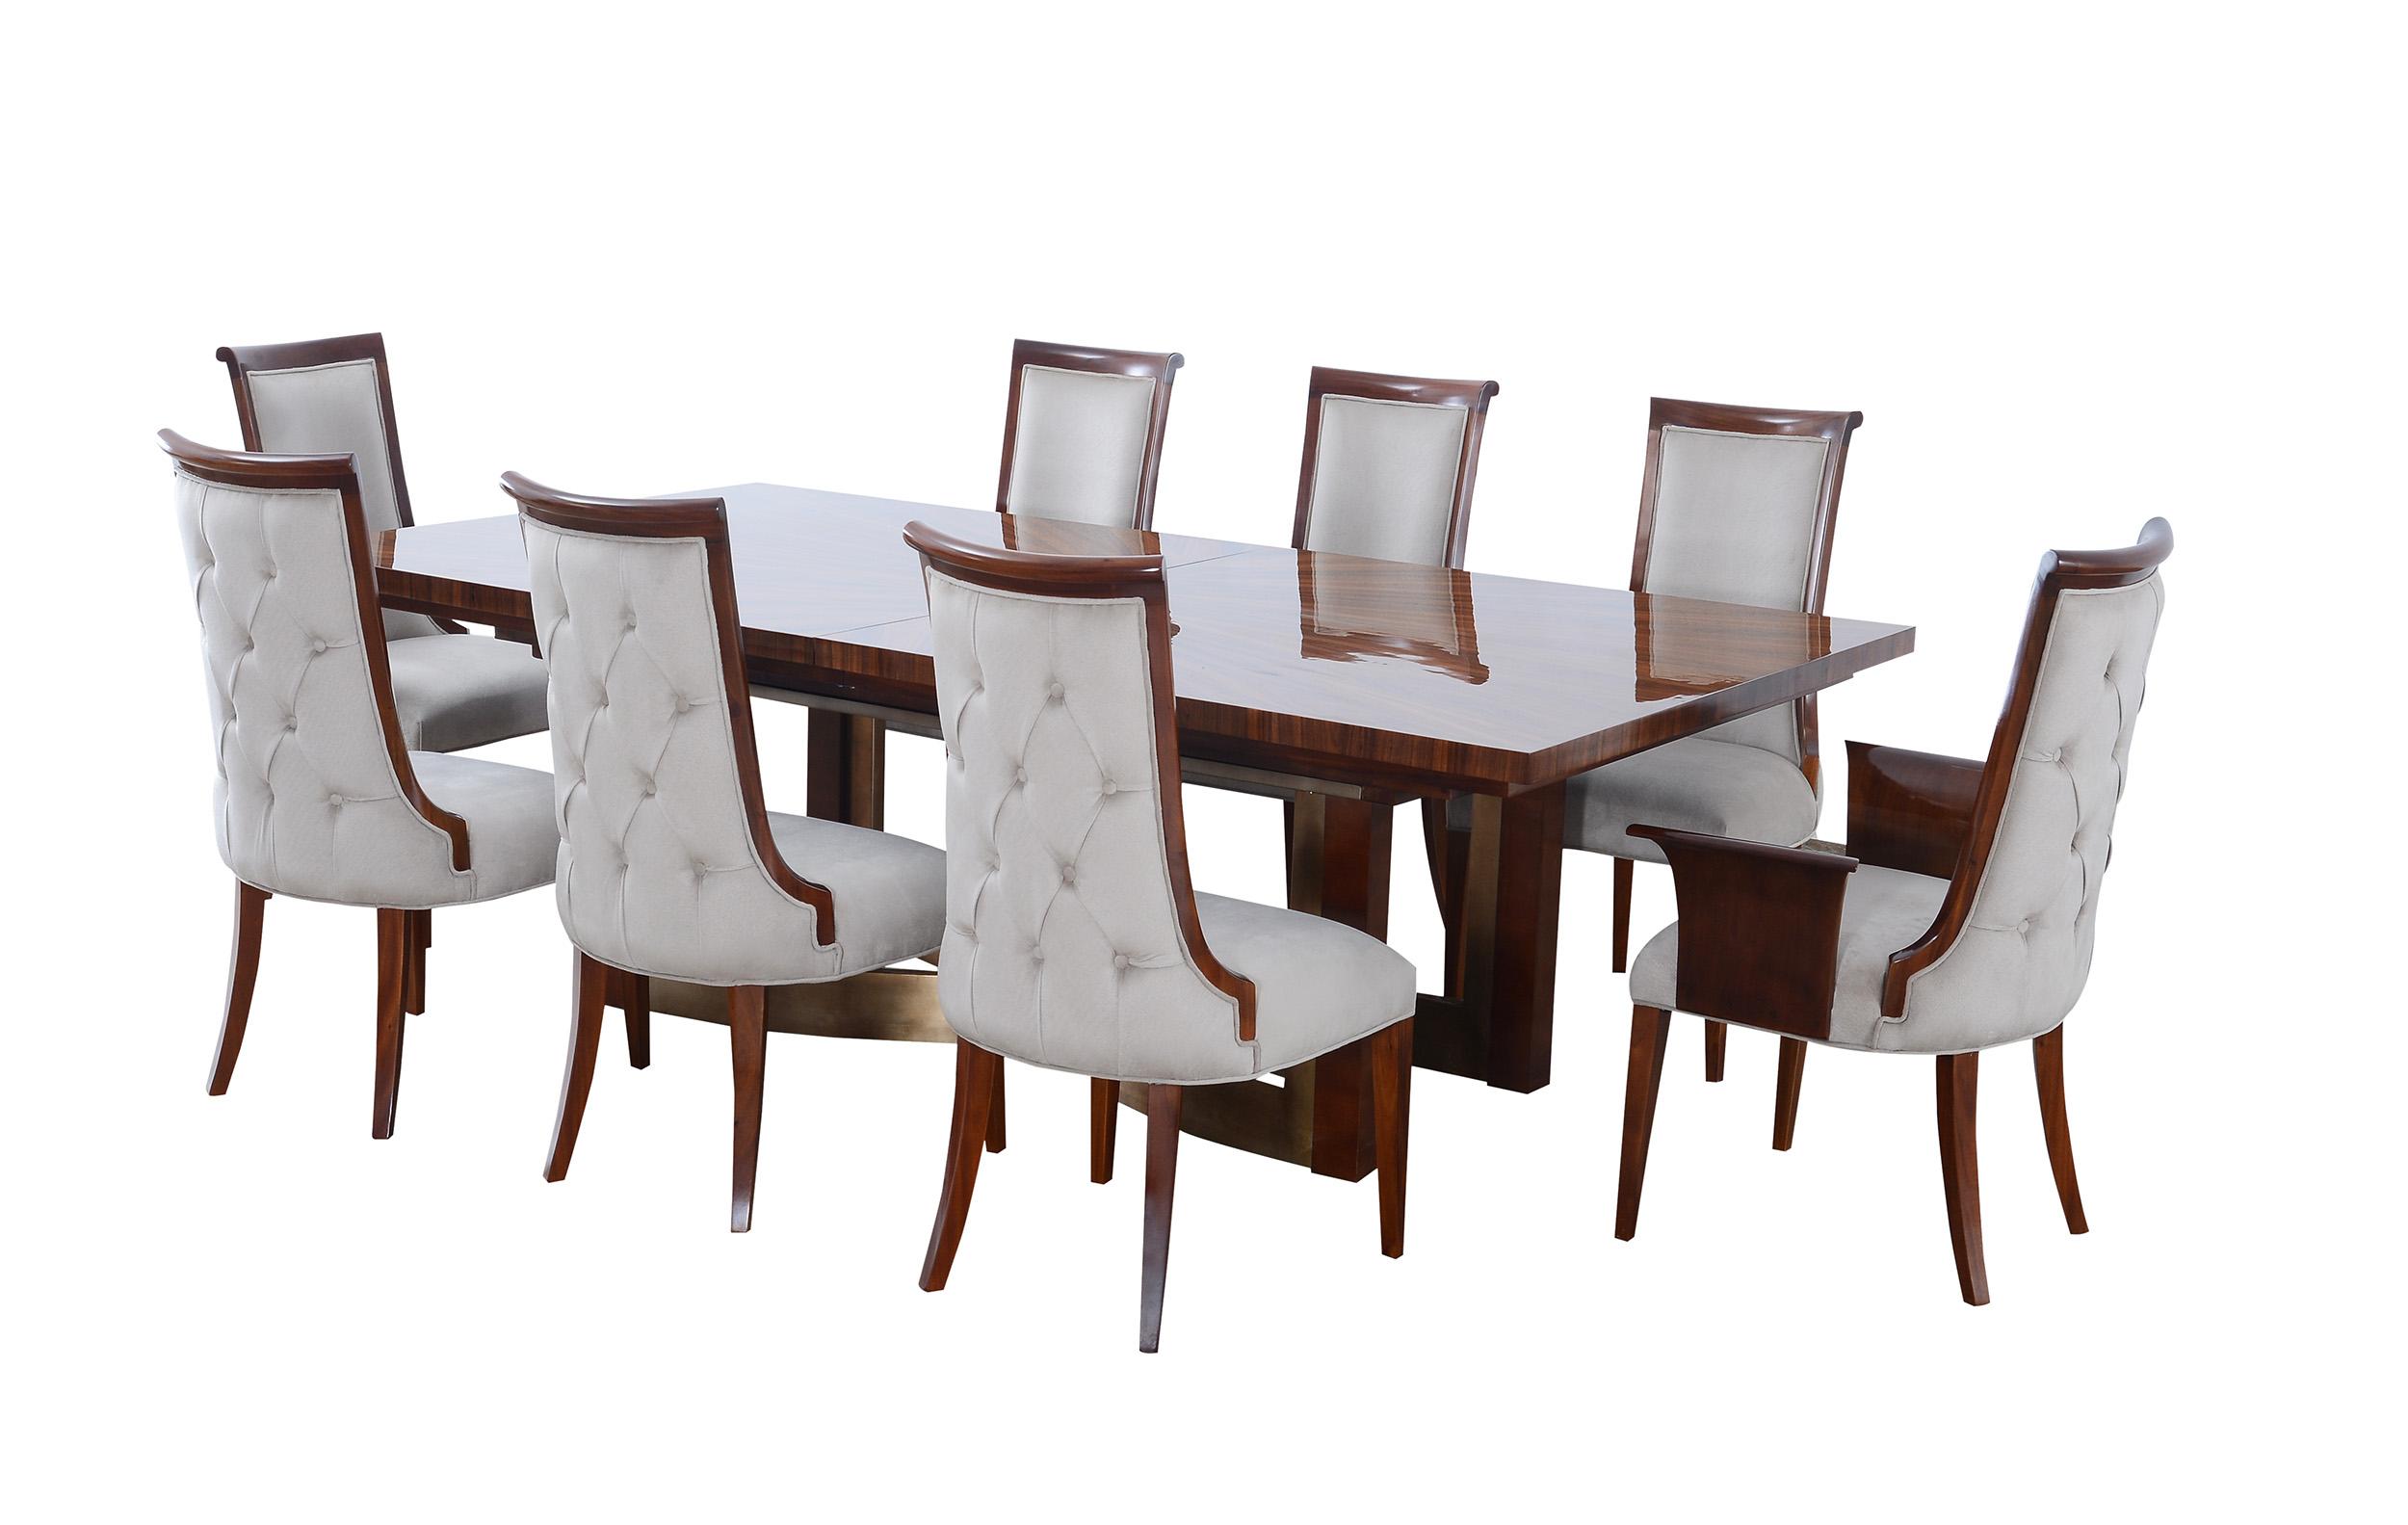 Modern Dining Table Set GLAMOUR 56015-DT-Set-9 in Mocha Fabric